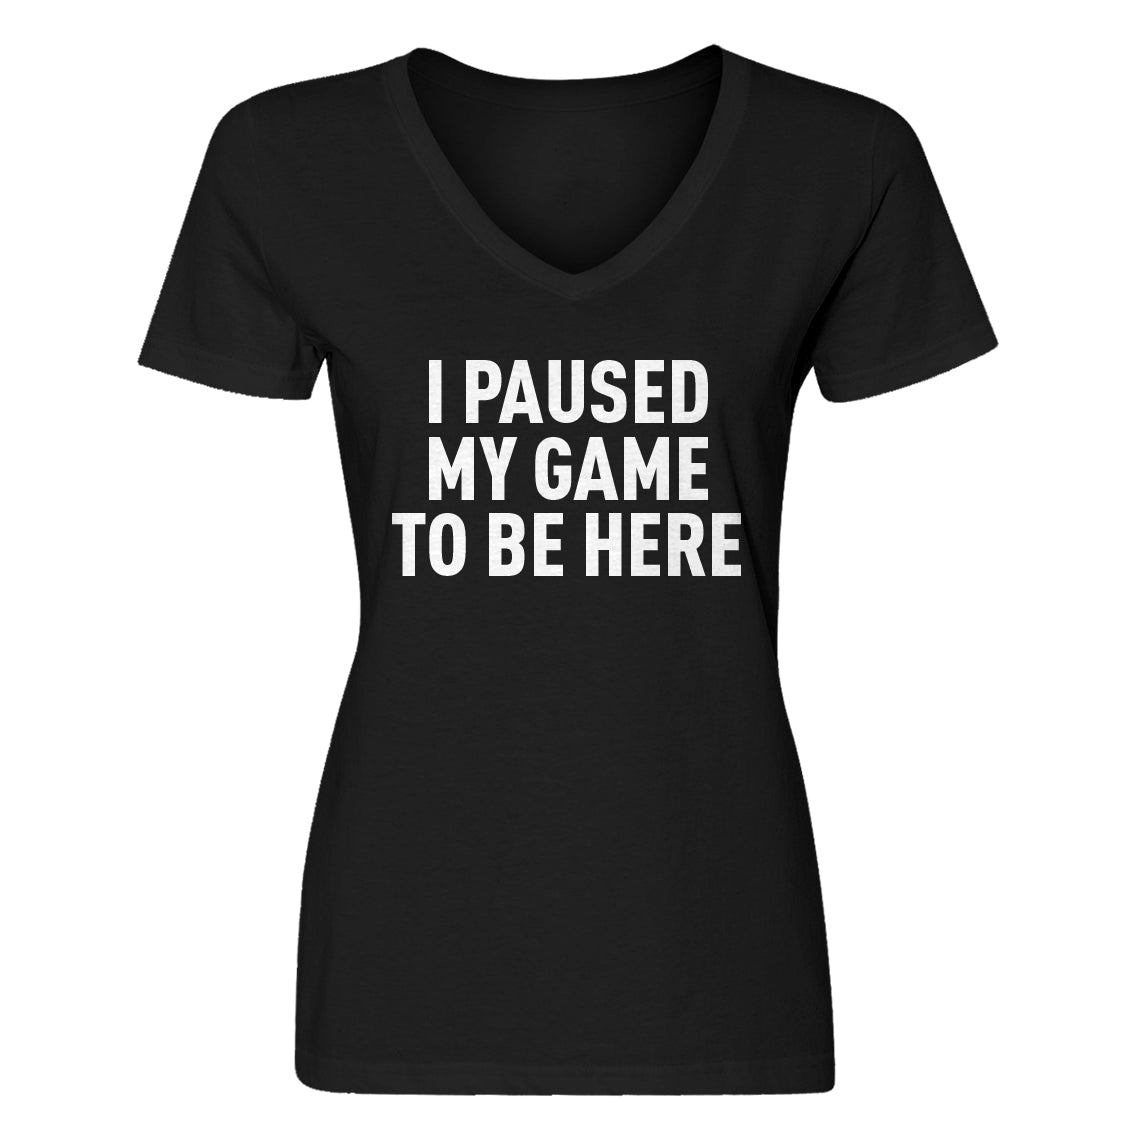 Womens I Paused My Game to Be Here V-Neck T-shirt